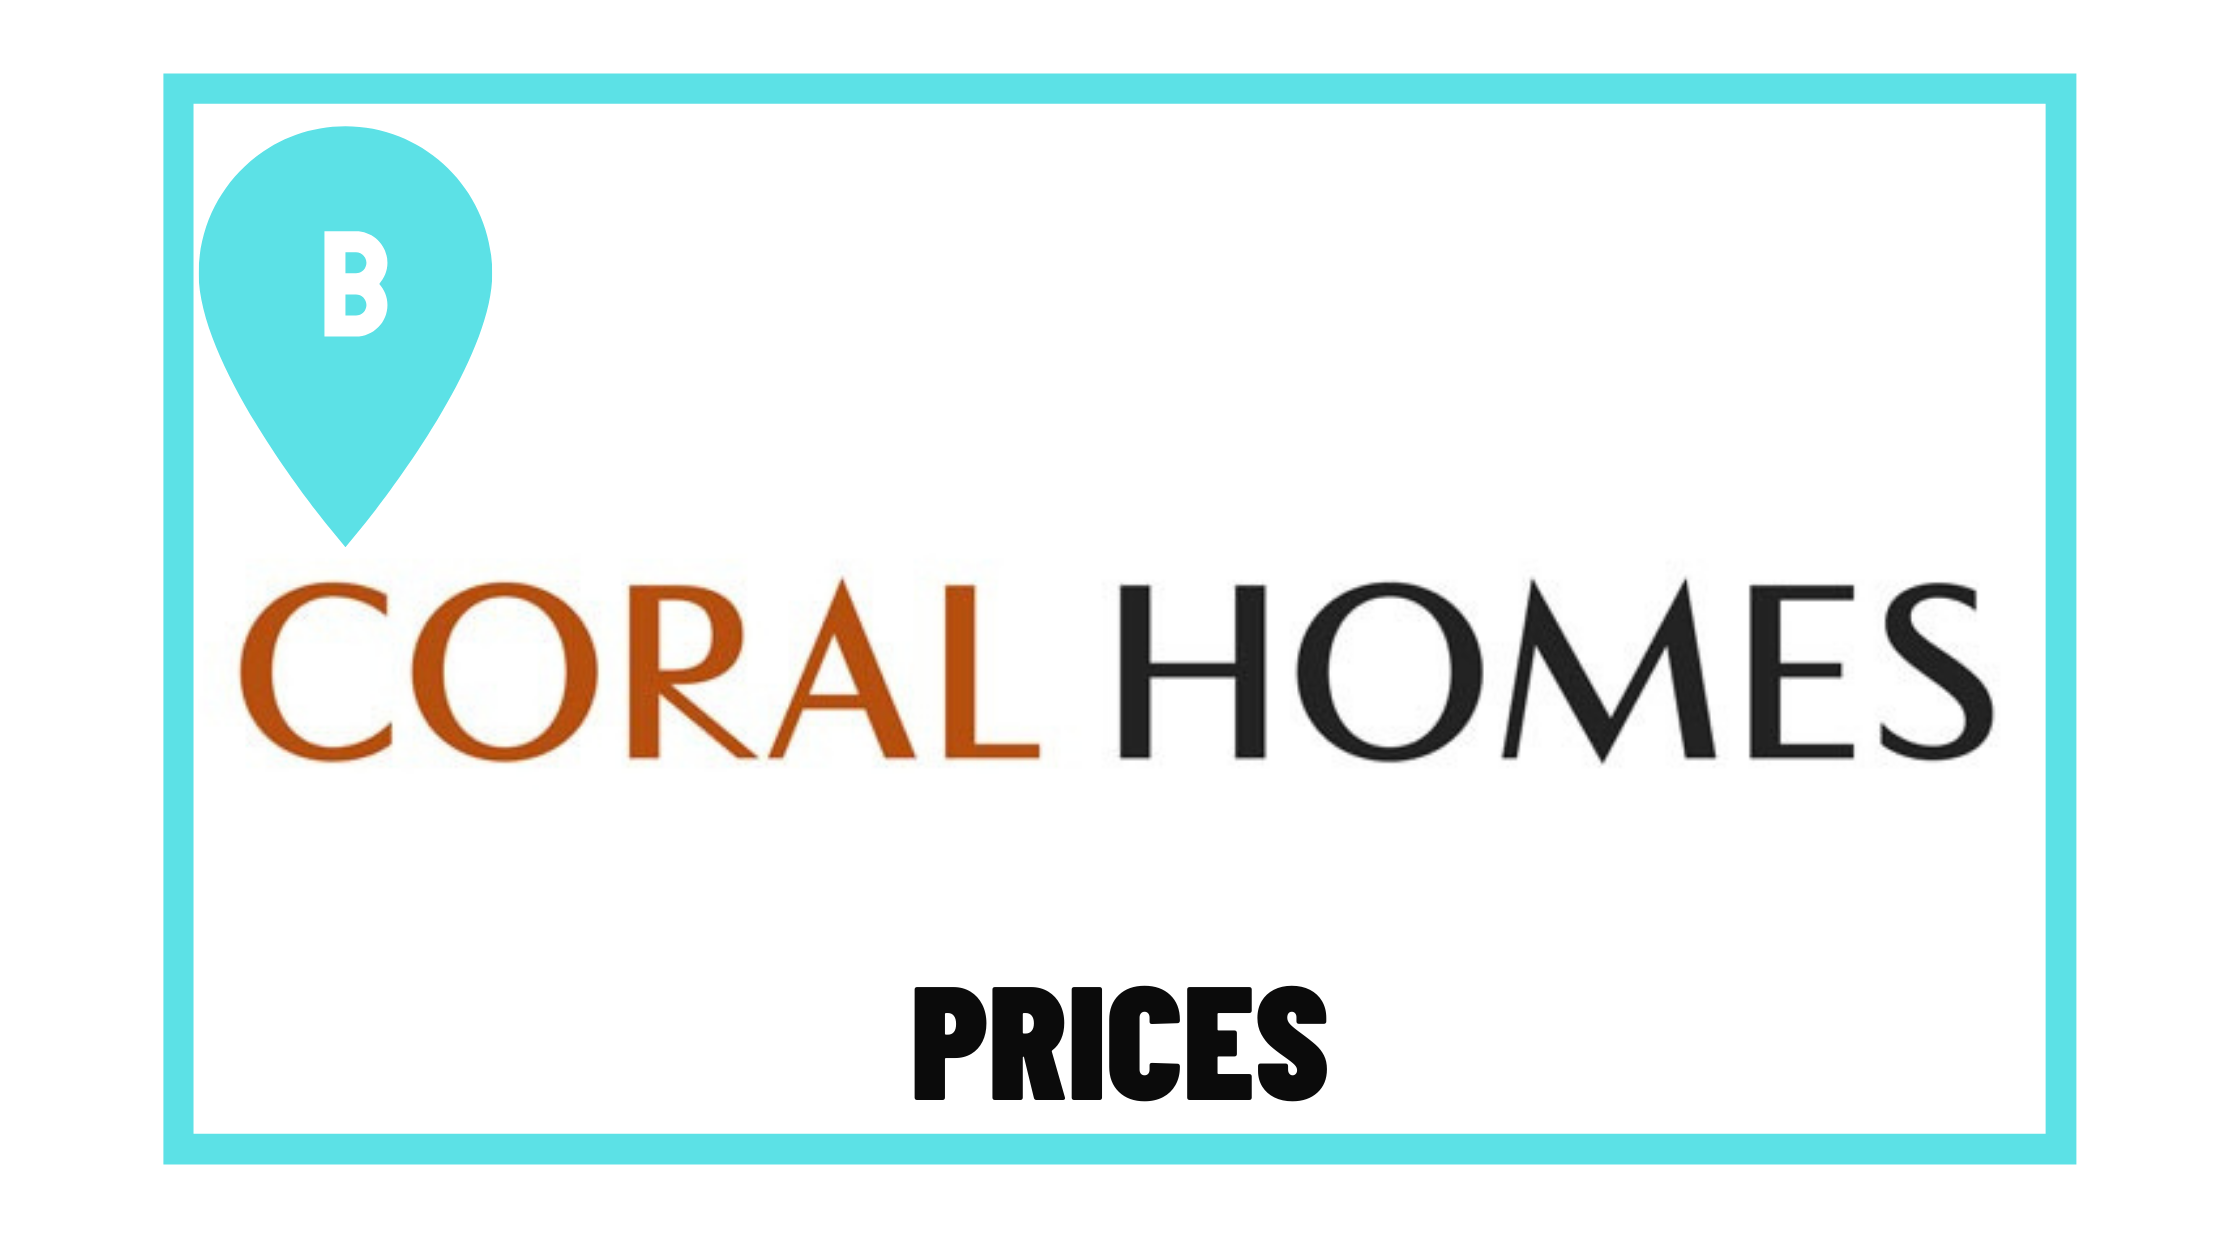 Coral Homes Prices